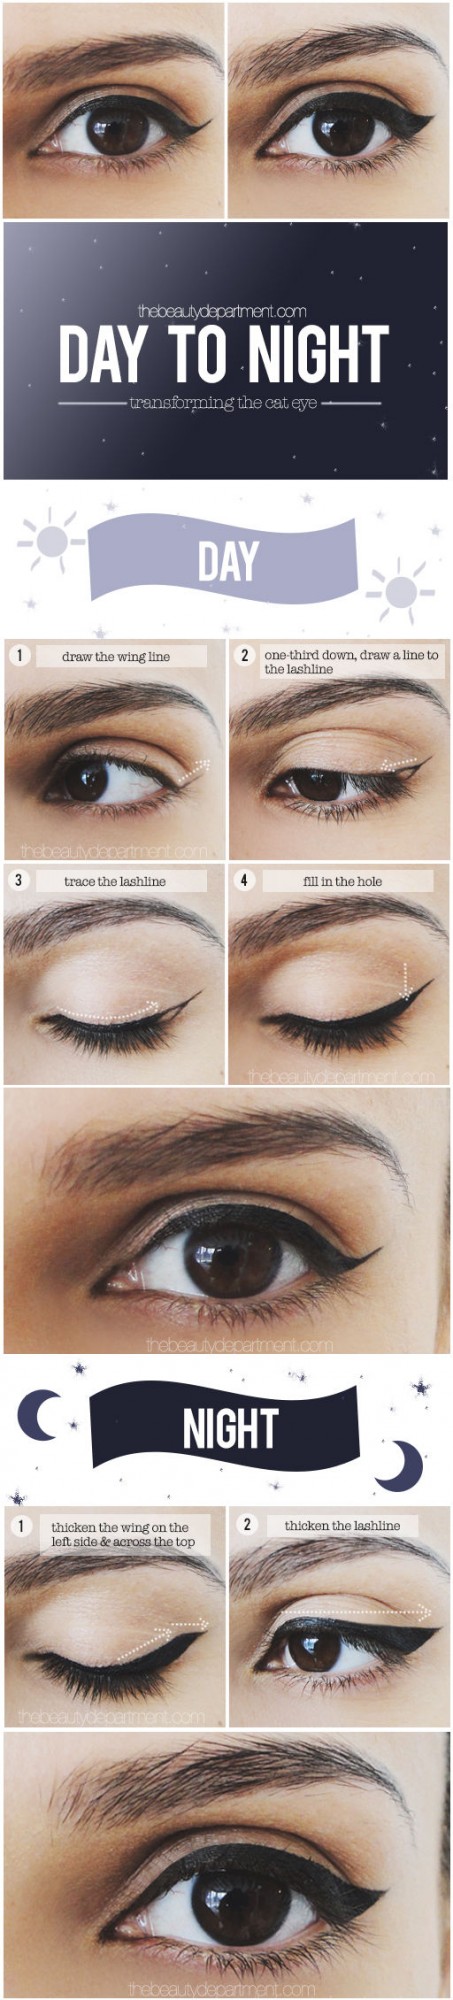 20 Great Makeup Ideas and Tutorials for Stunning Spring Look  (13)